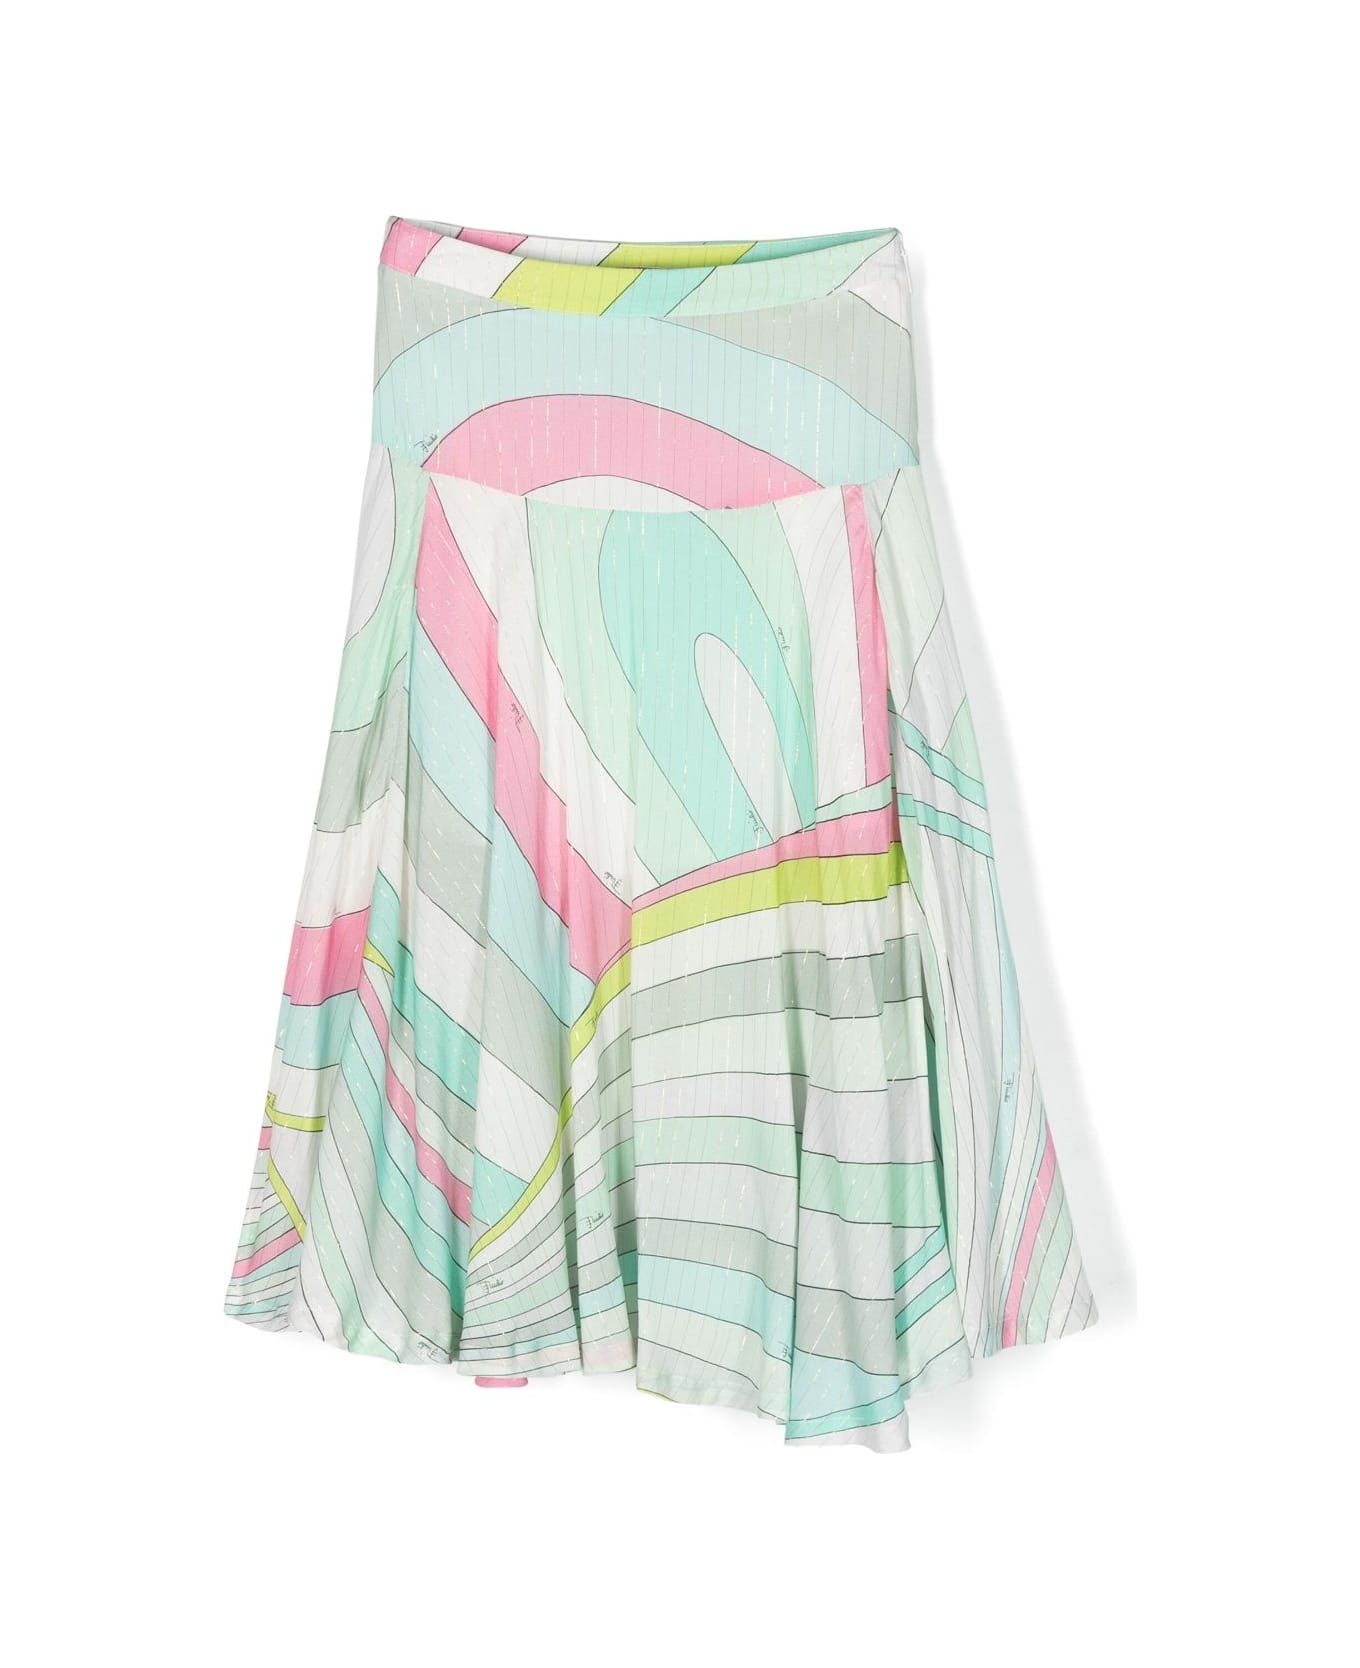 Pucci Pleated Skirt - Light blue